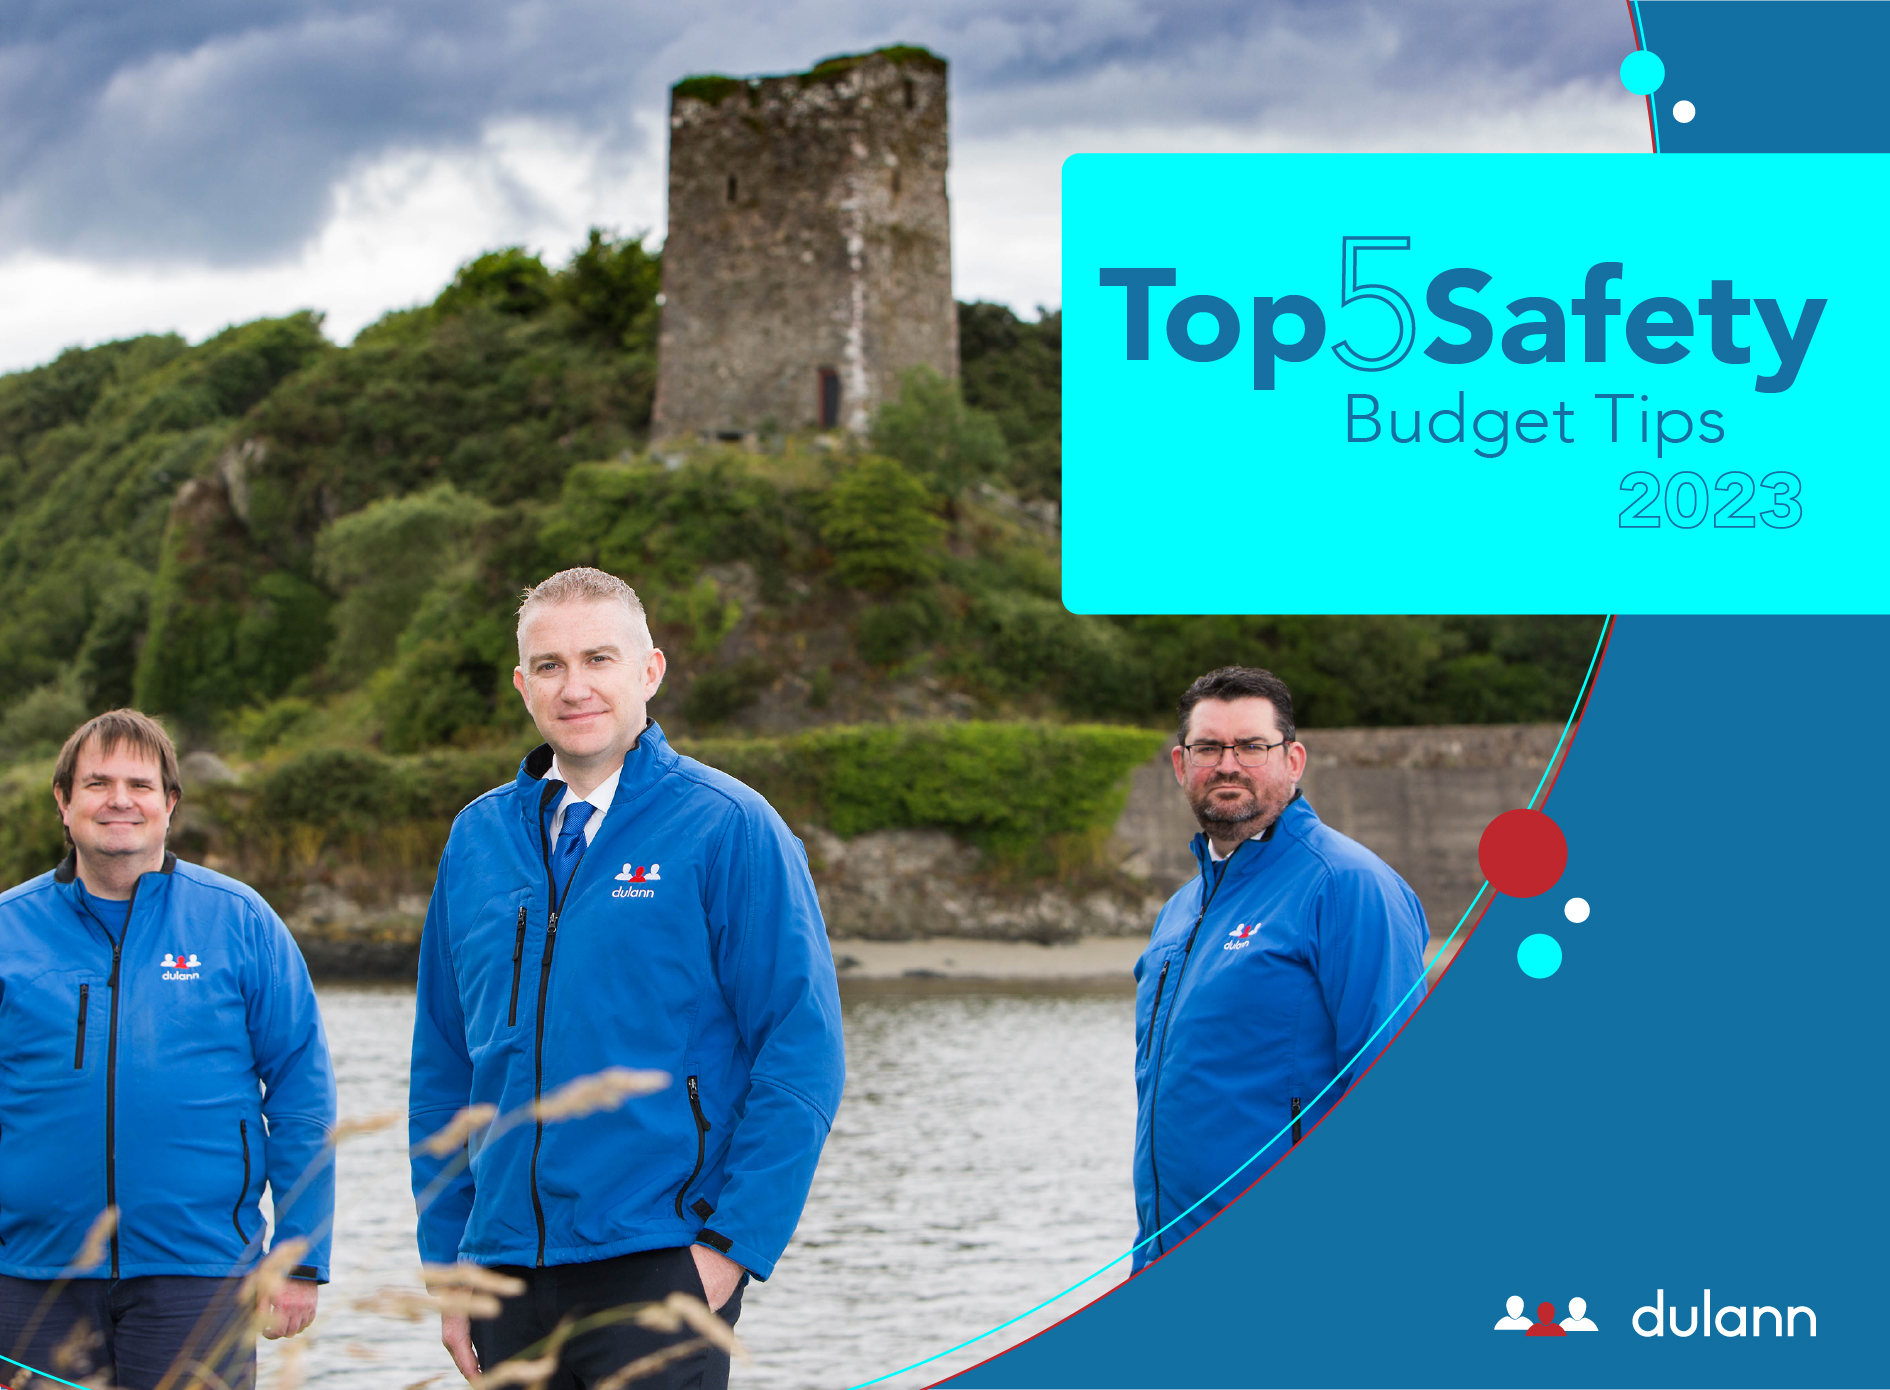 Top 5 Safety Budget Tips for 2023